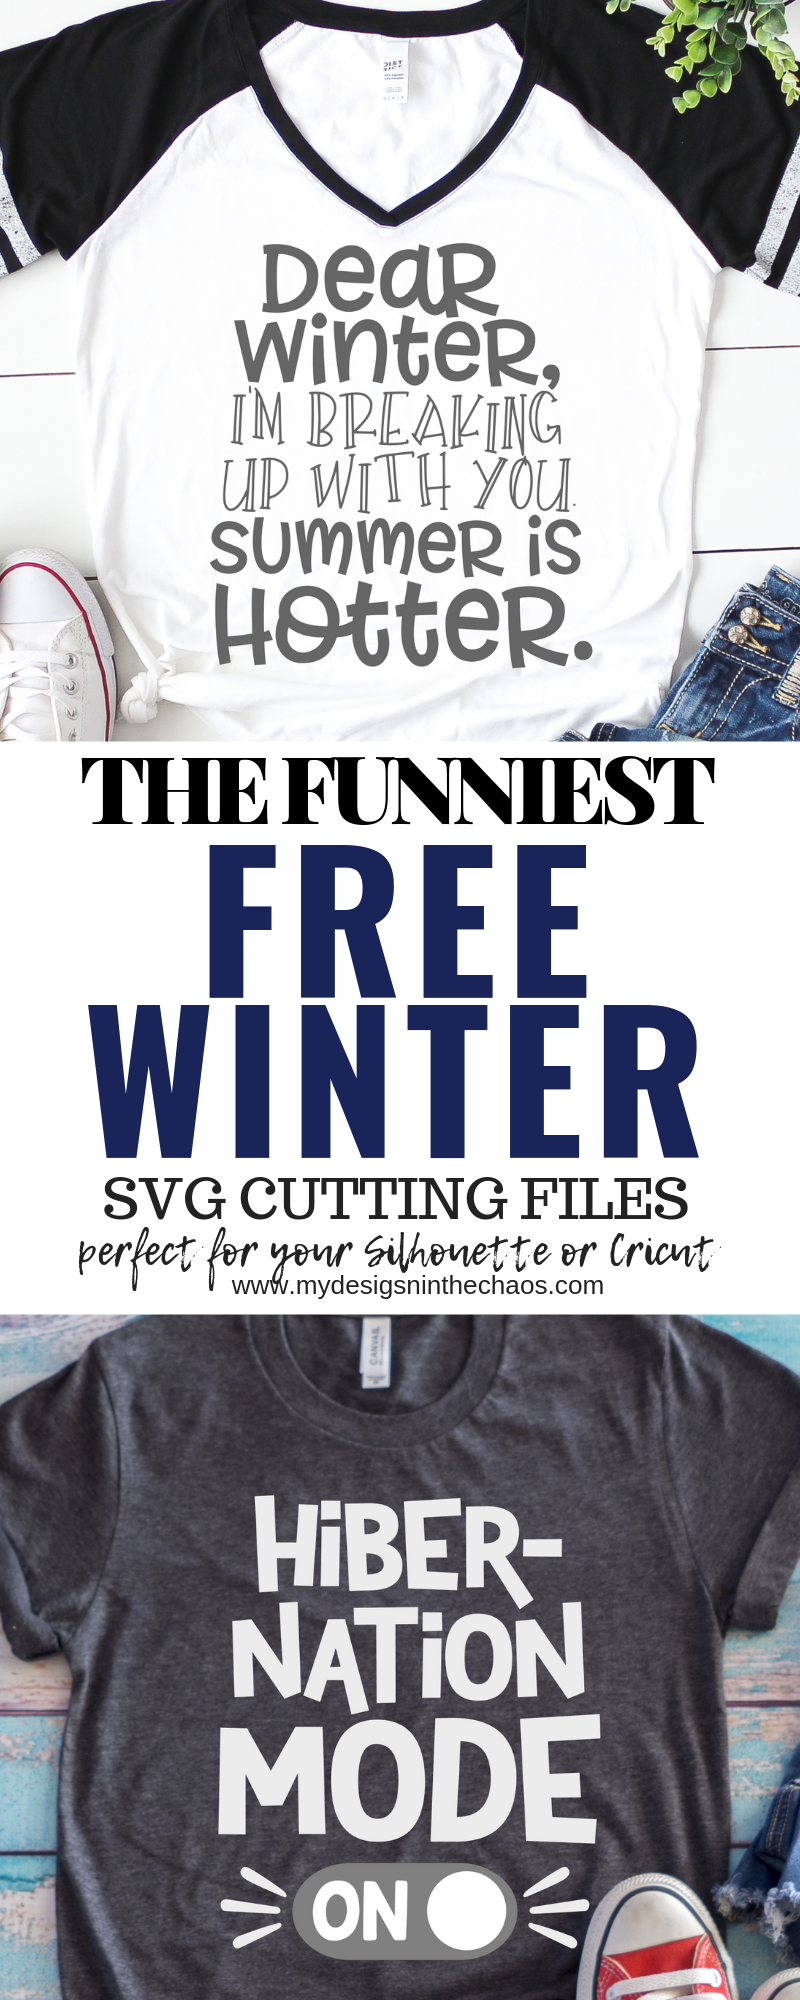 Download Free Funny Winter SVG Files - My Designs In the Chaos